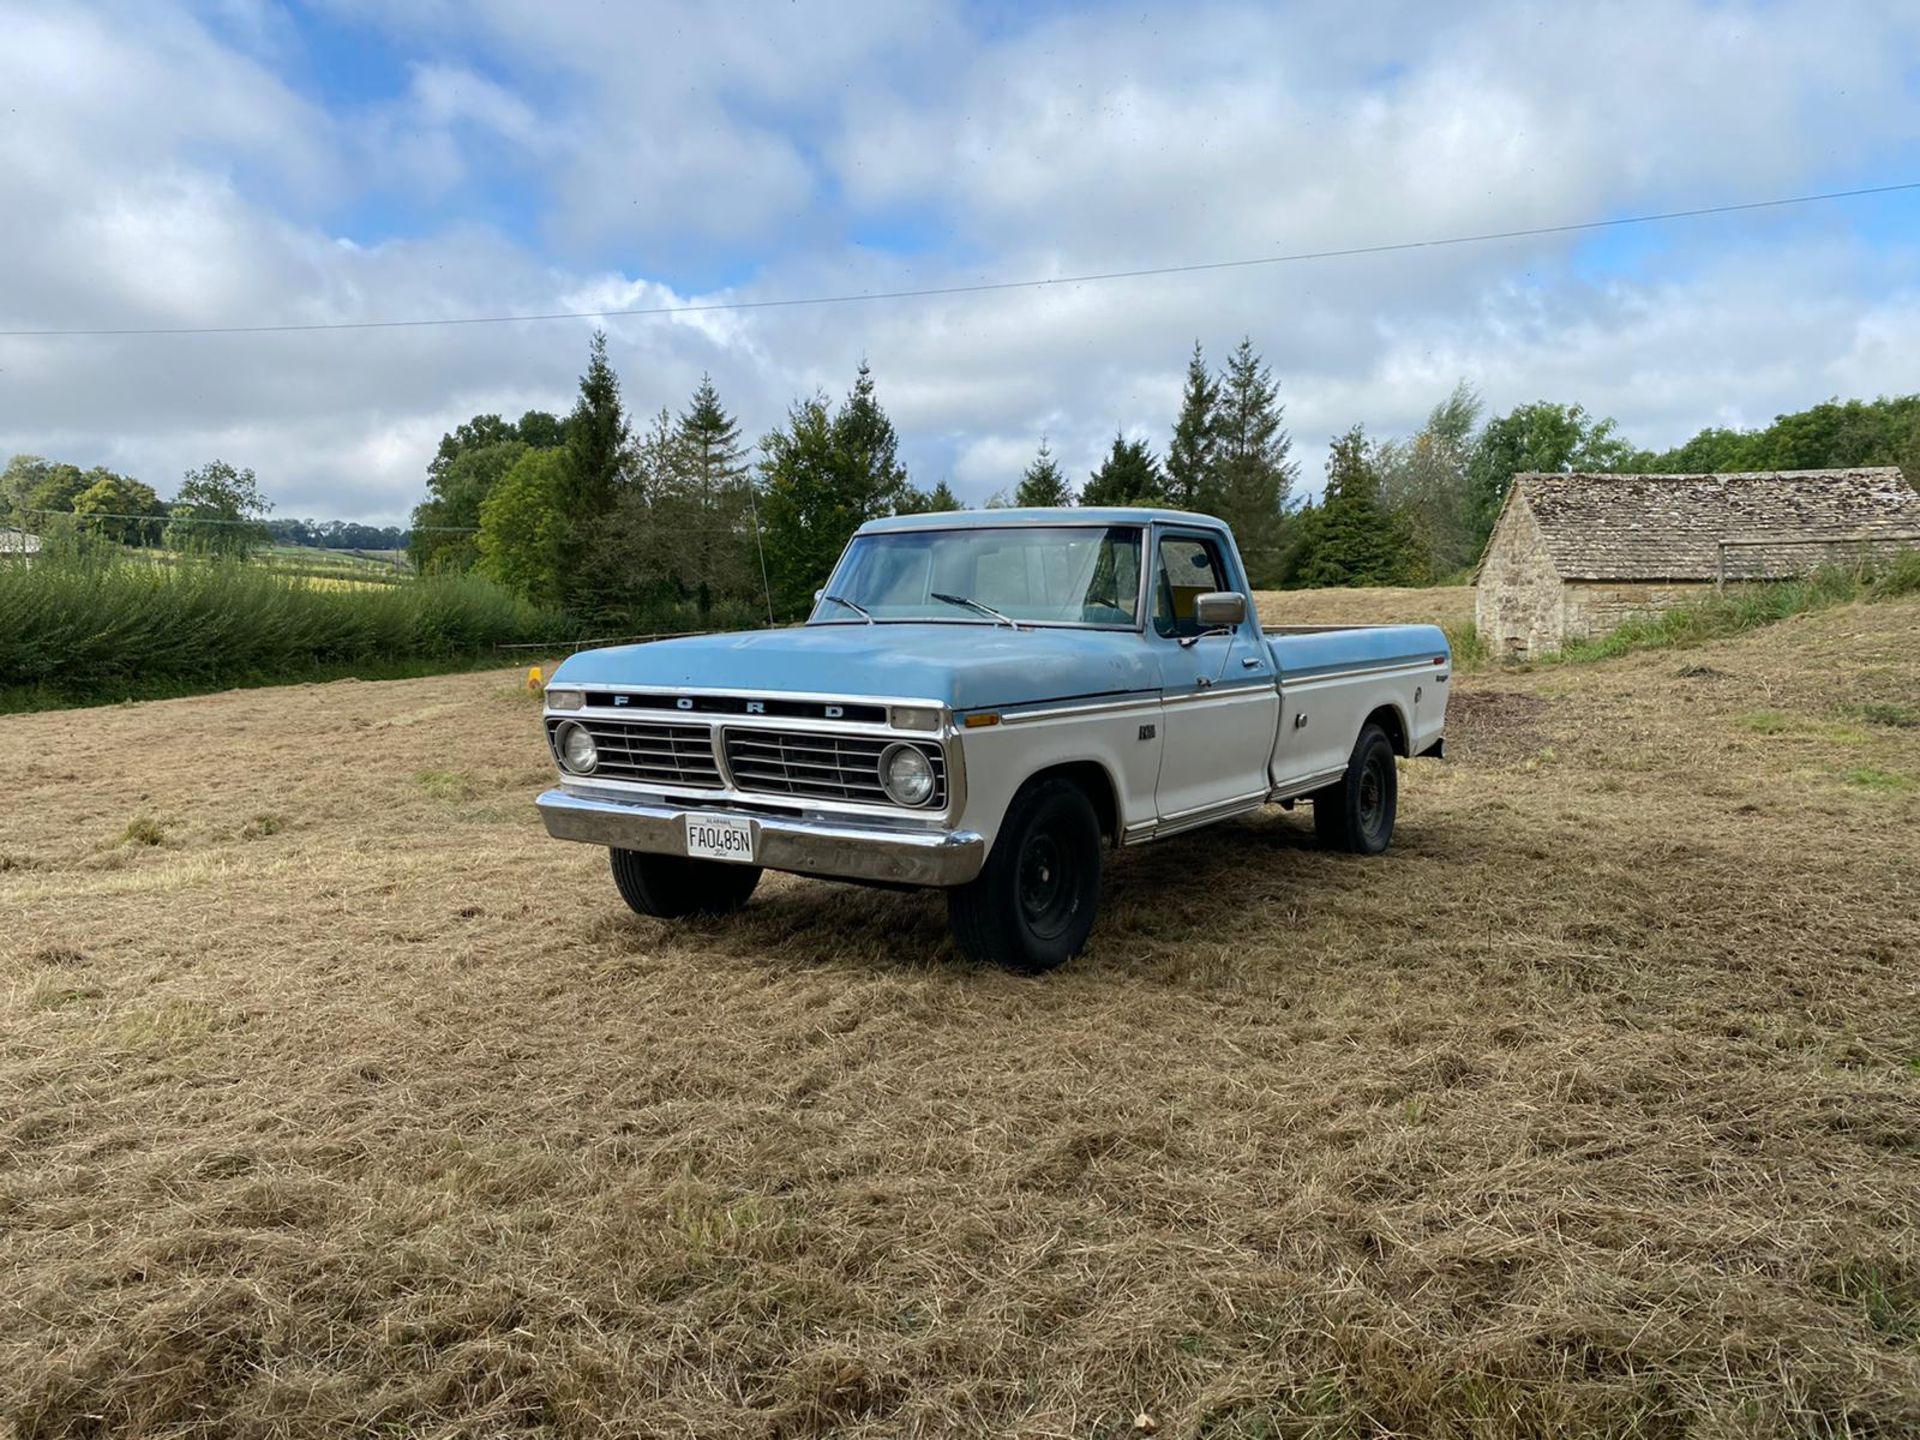 1975 FORD F-250 6.4 (390) V8, 4 SPEED MANUAL, HAS JUST BEEN REGISTERED, NEW BENCH SEAT *NO VAT* - Image 9 of 22